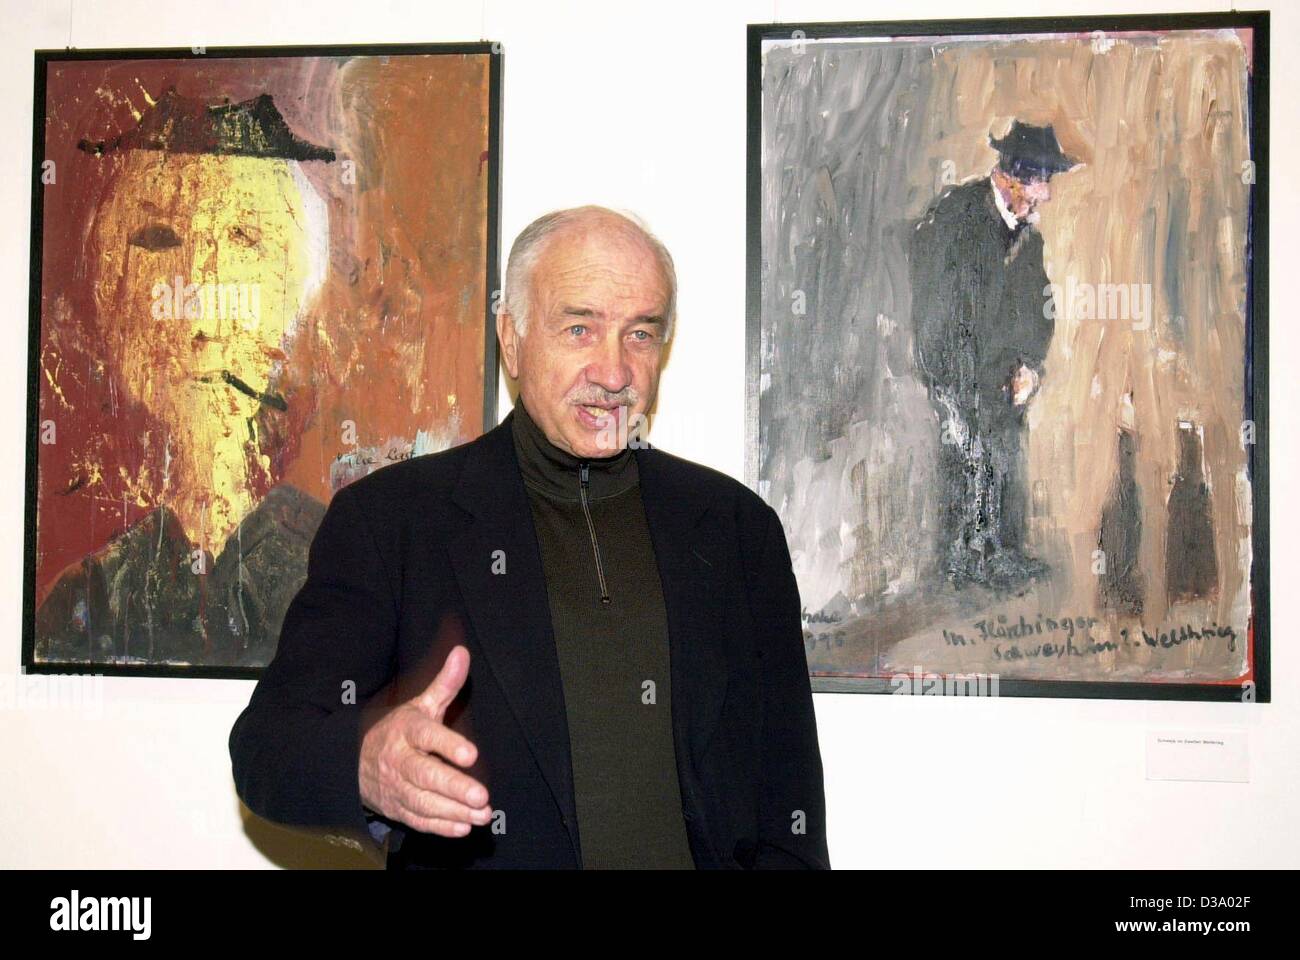 (dpa) - German actor Armin Mueller-Stahl is standing between his paintings 'The Last Good Time II' (L) and 'Schwejk in World War II' in the film museum in Postsdam, 30 January 2001. Mueller-Stahl became internationally famous in Hollywood movies like 'Music Box', 'Shine', 'Night on Earth', and 'Miss Stock Photo